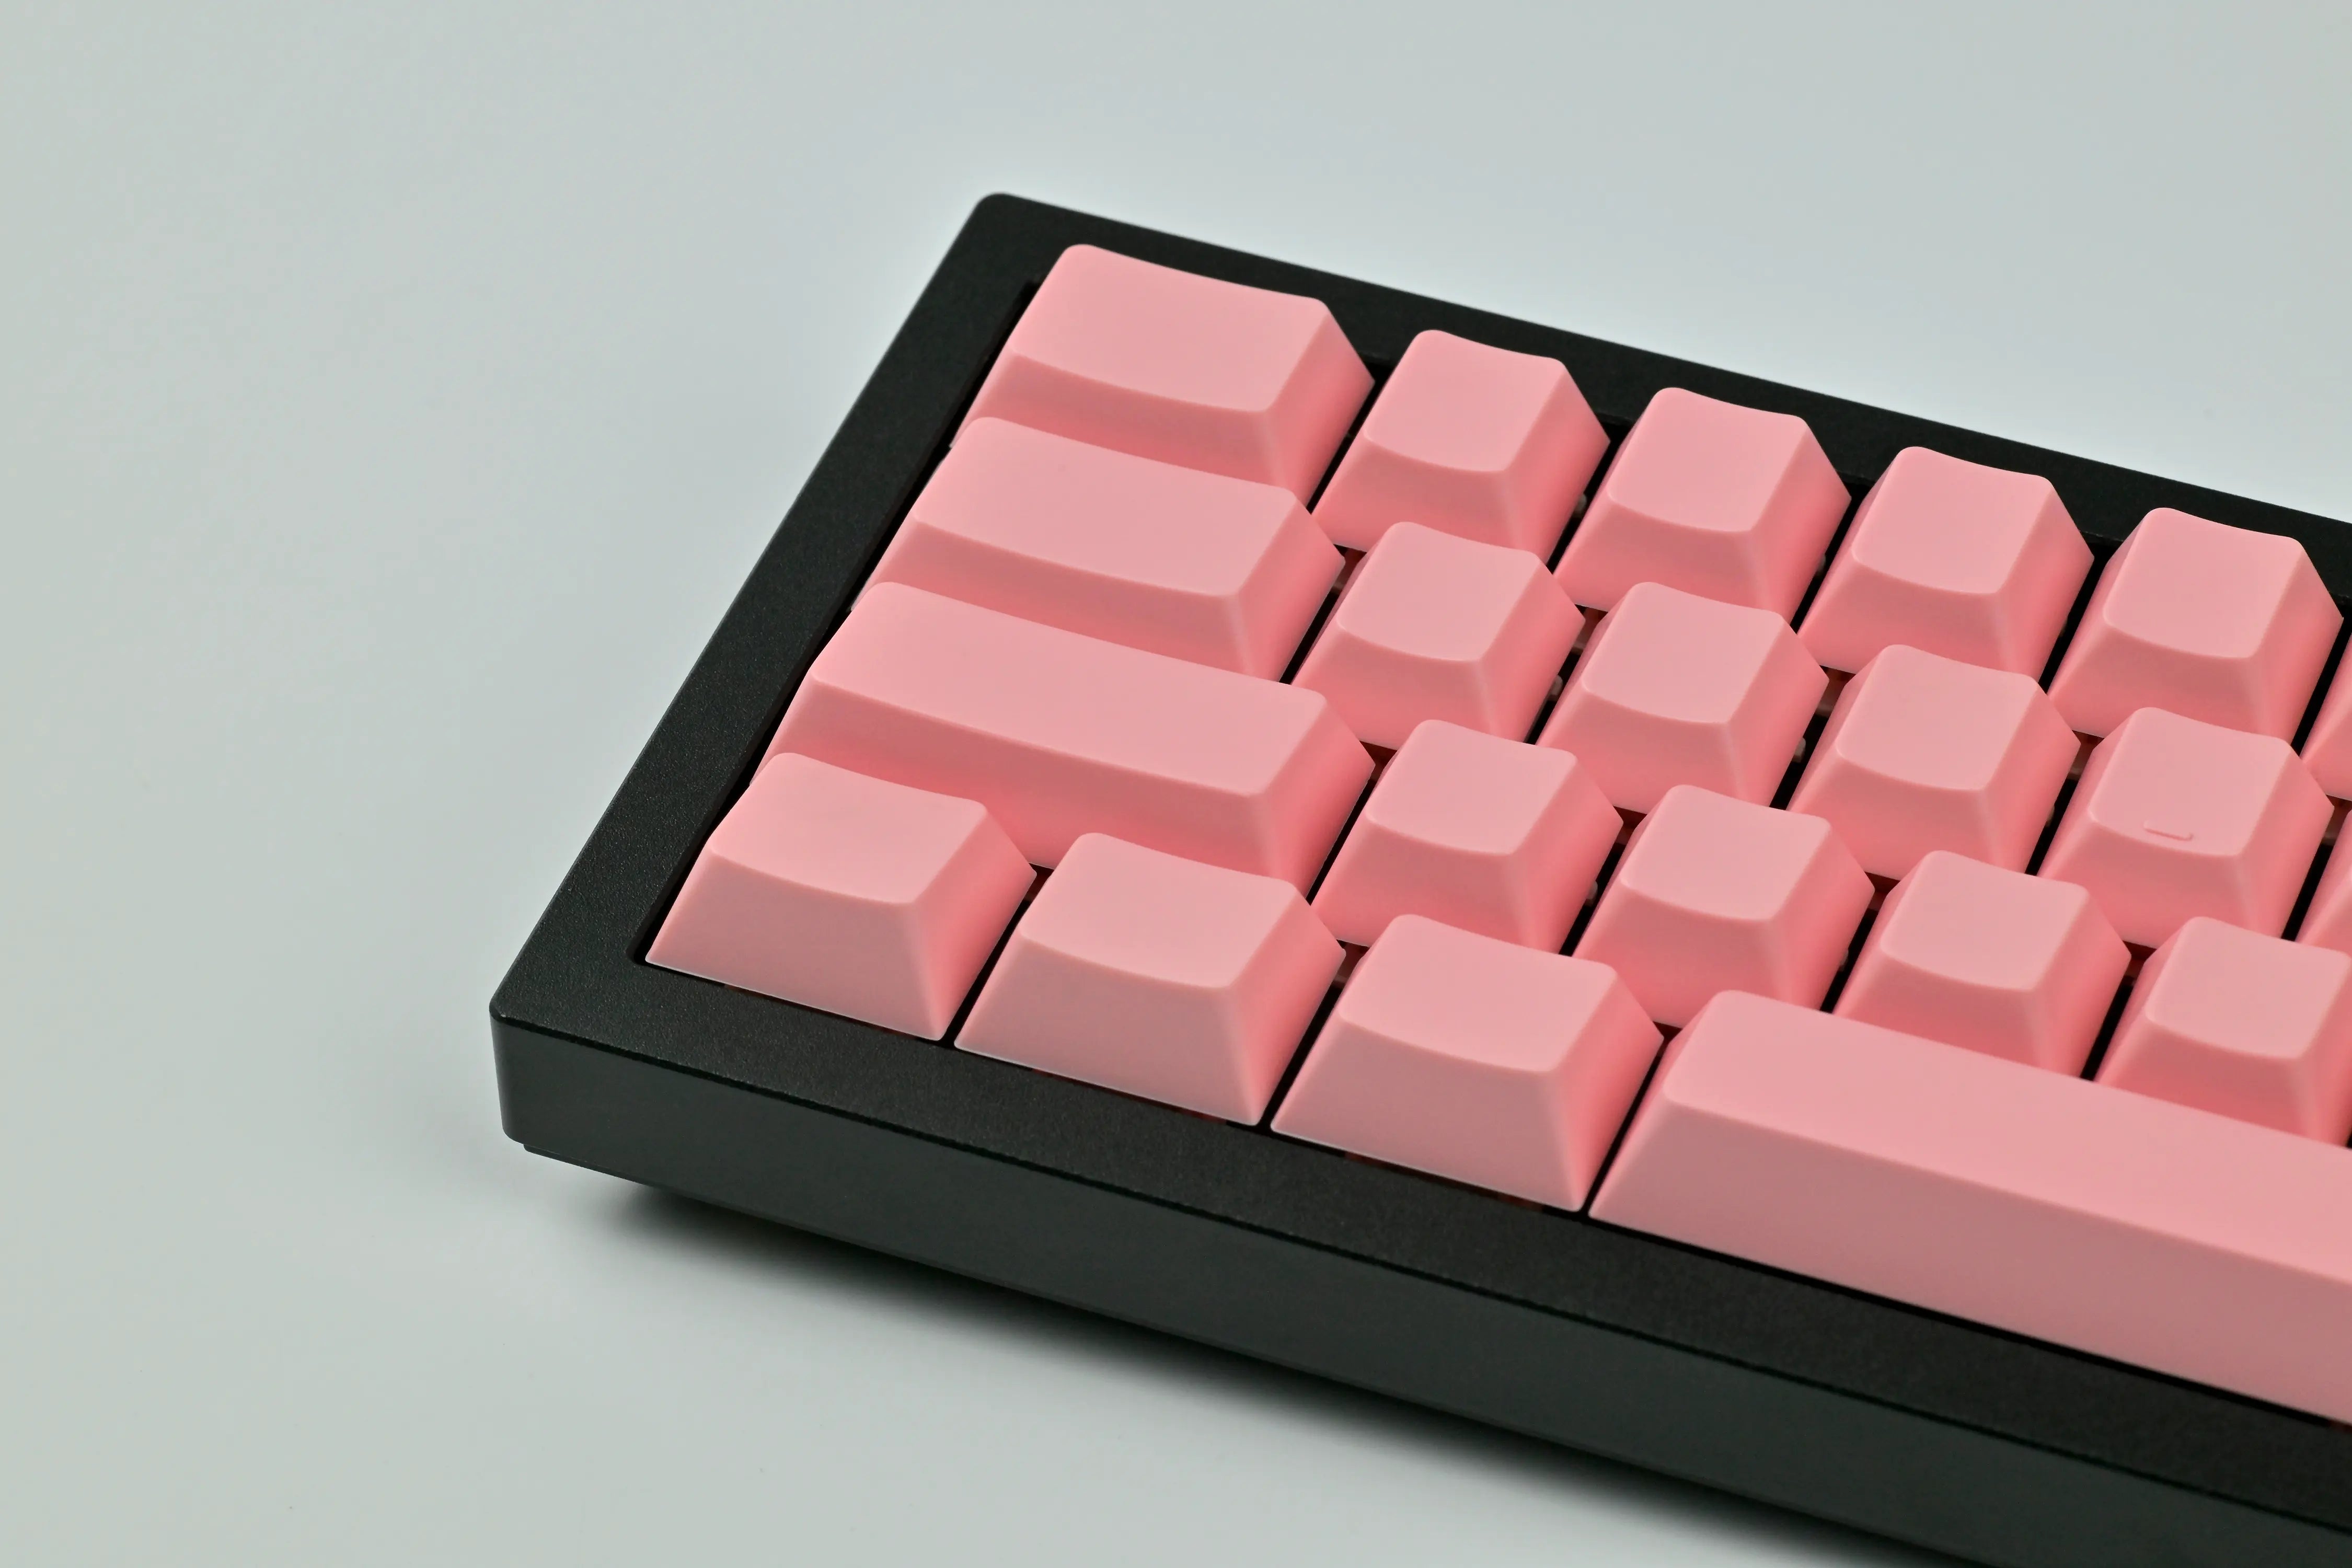 Keyreative ABS Cherry Profile Pink Blank Keycaps